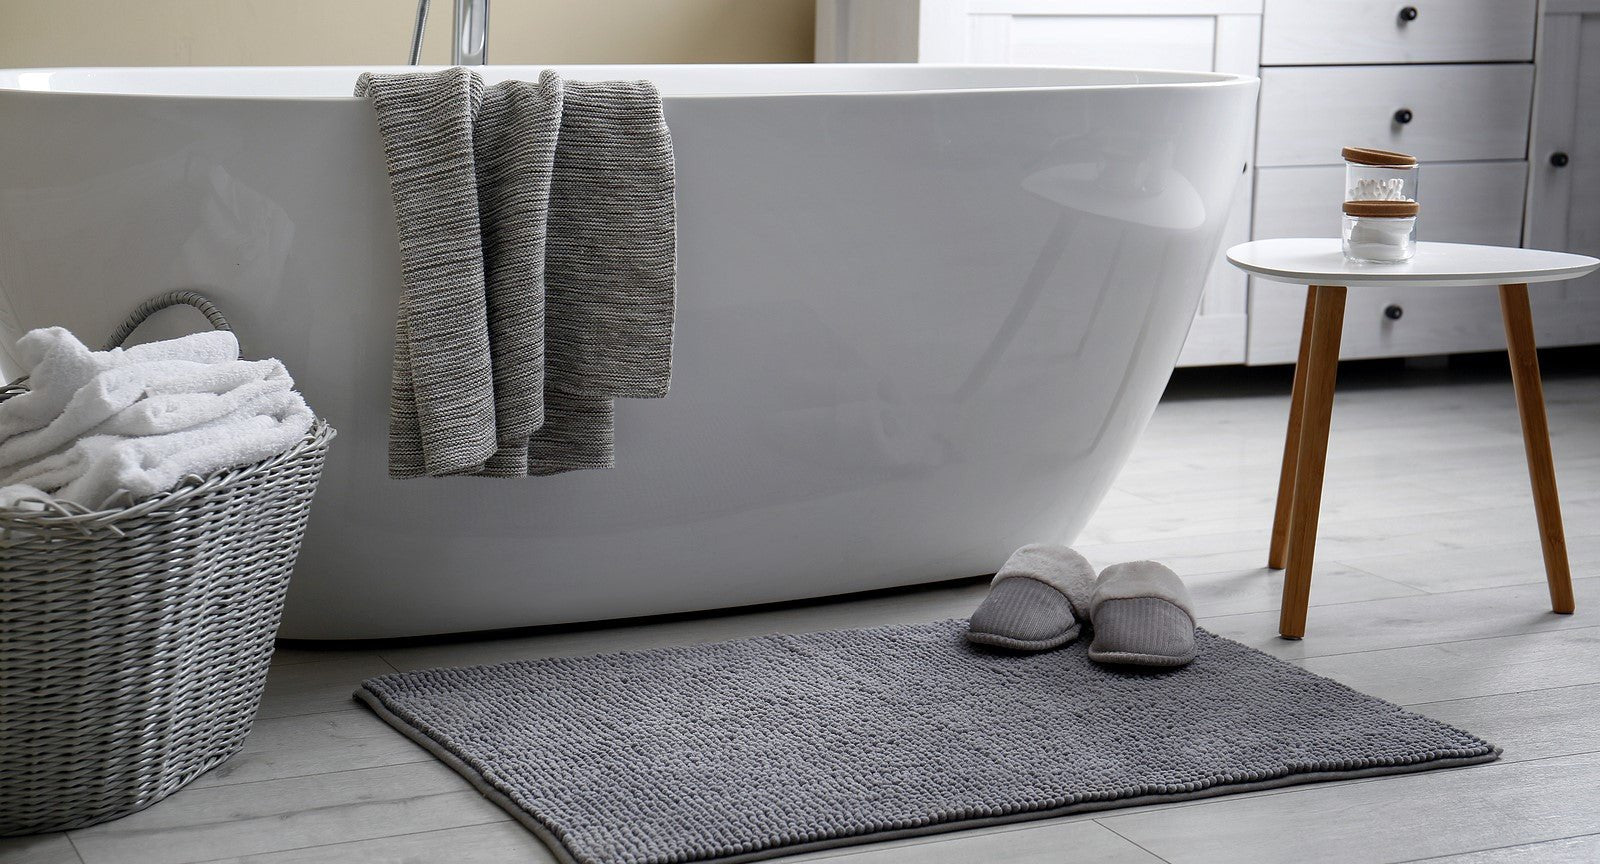 The Difference Between Bath Rugs and Bath Mats - InnStyle